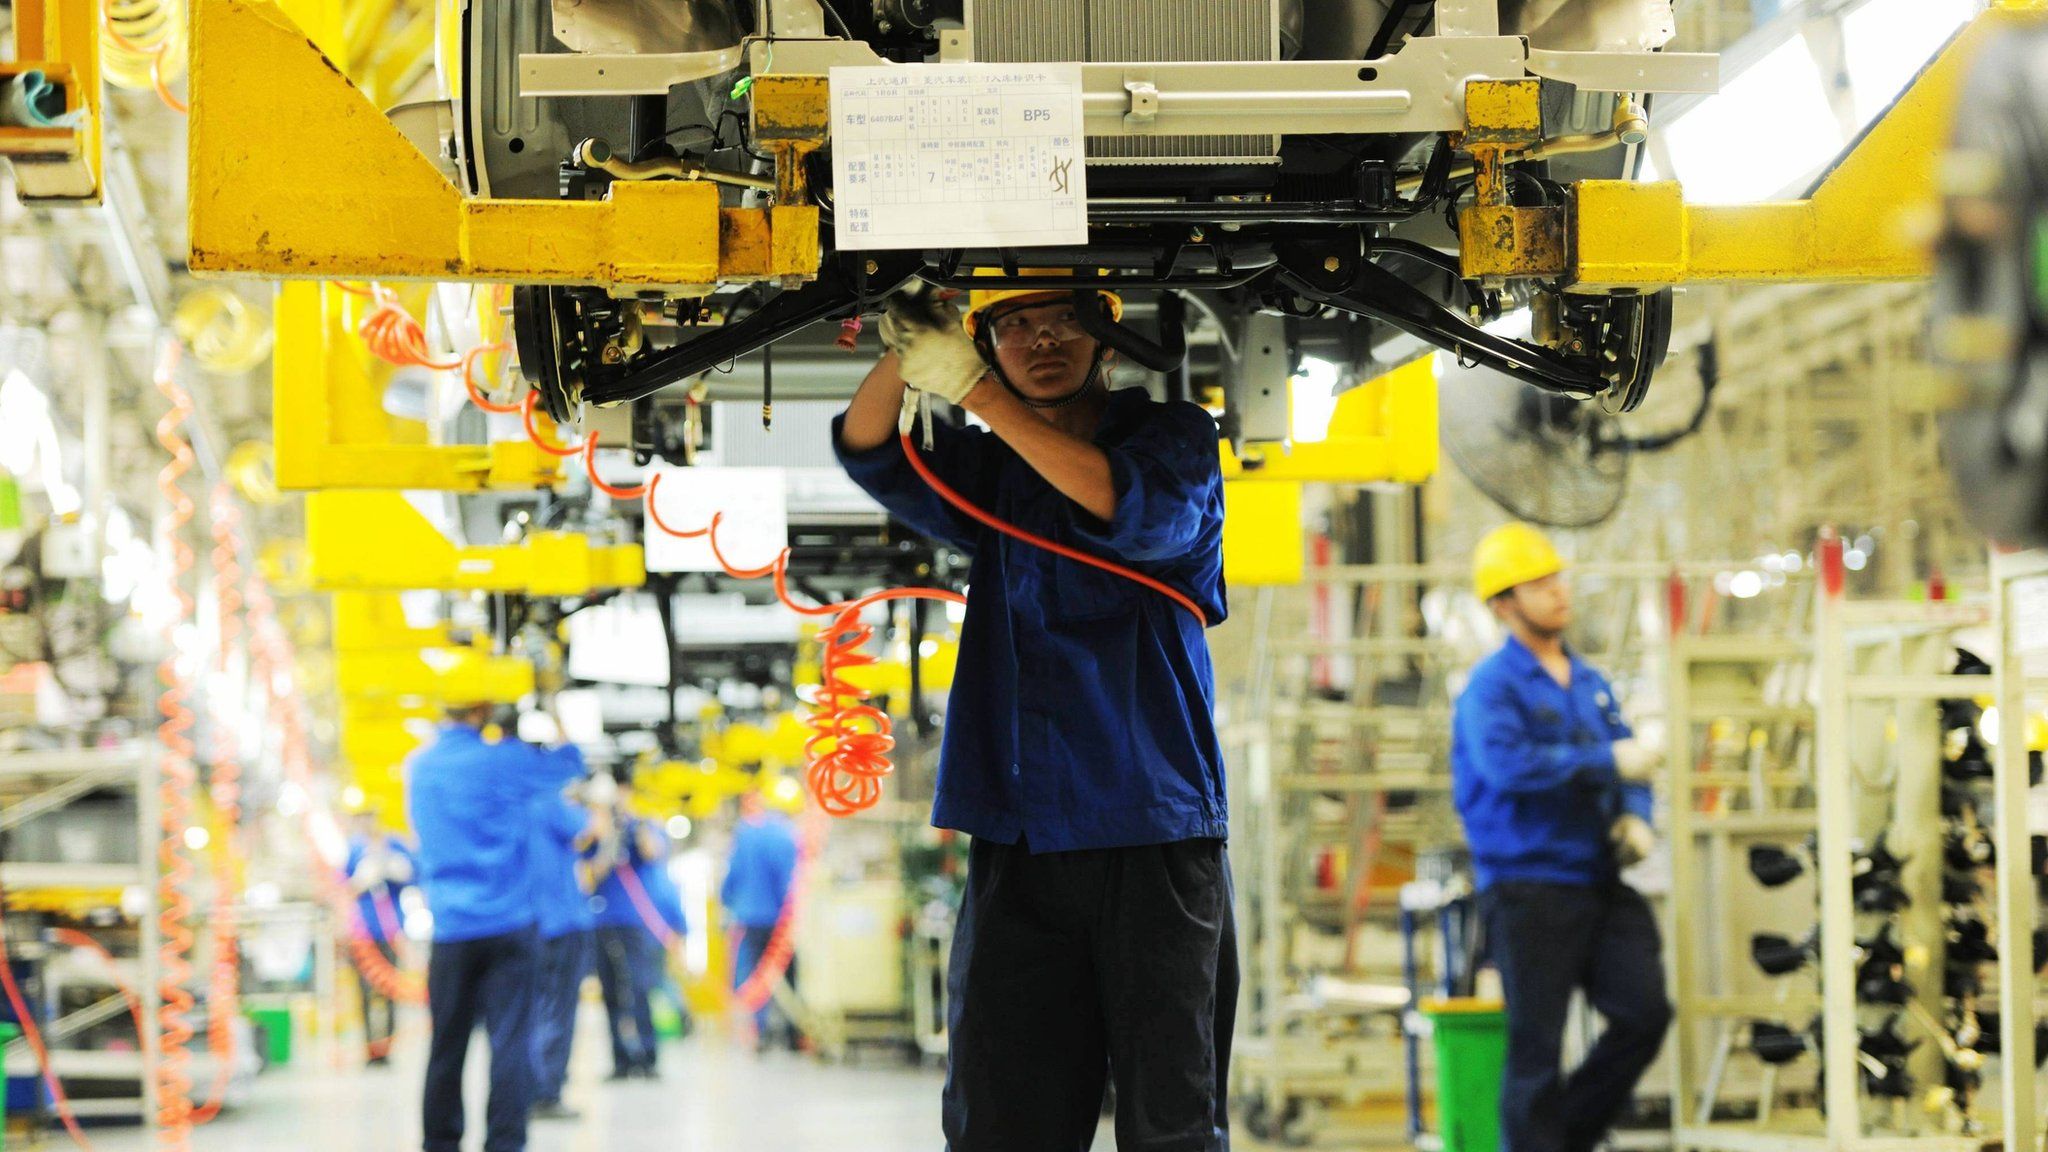 Workers install car parts at their assembly line in a factory in Qingdao, China